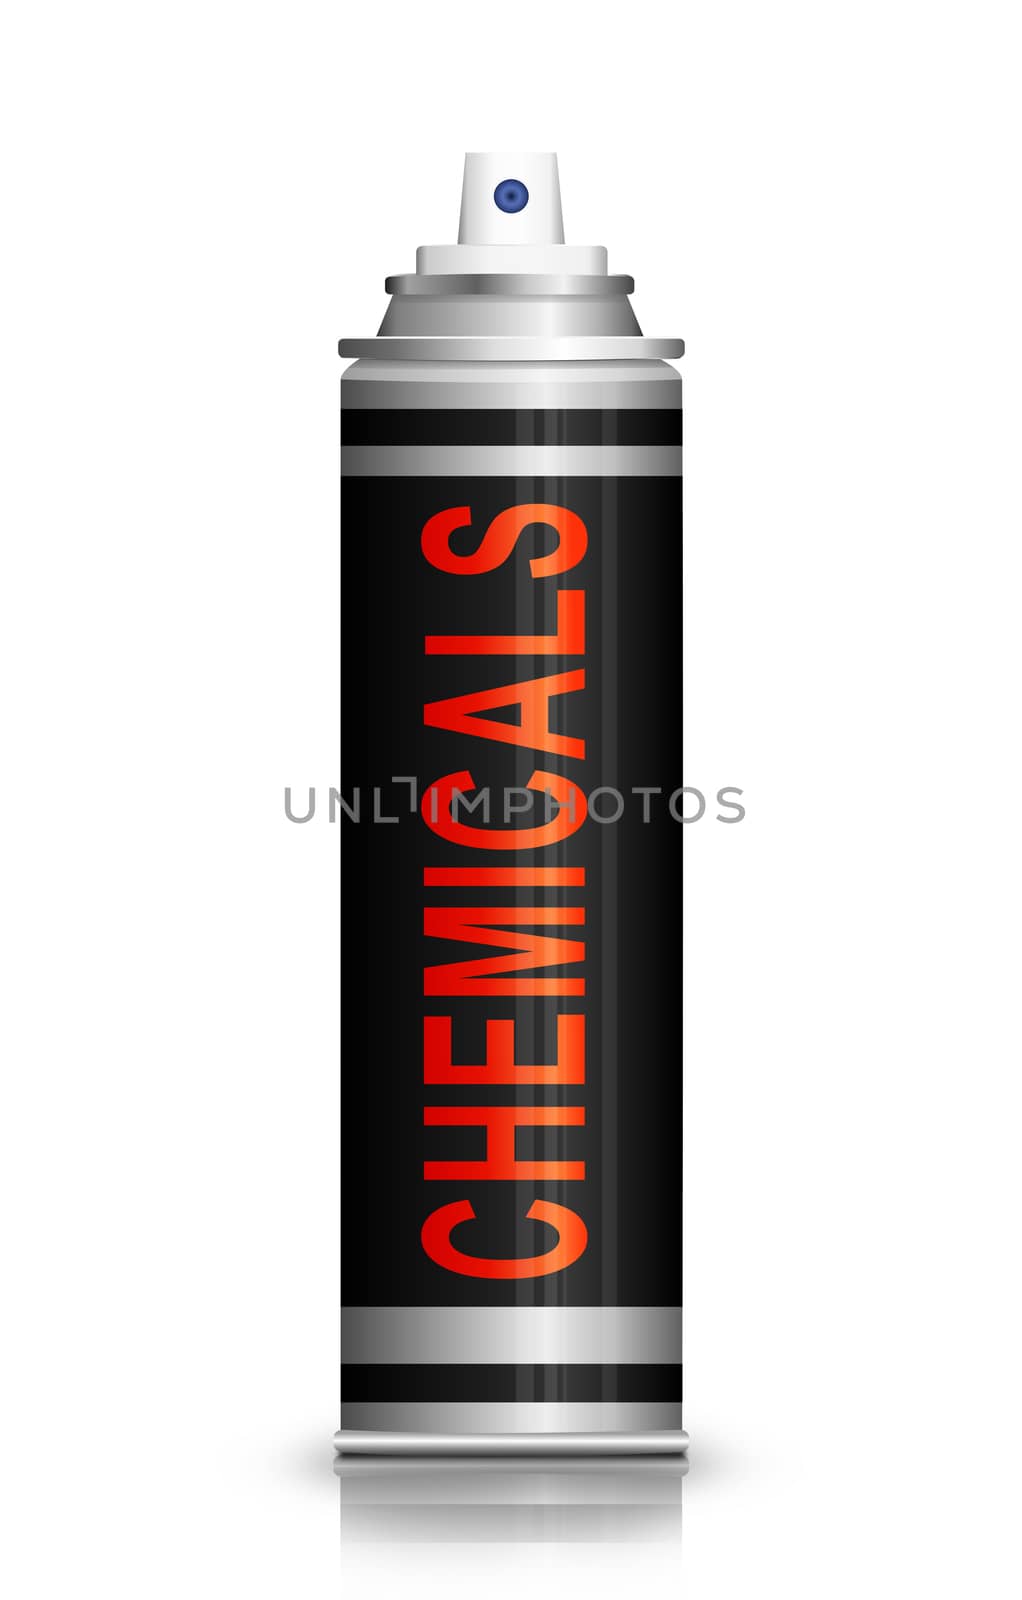 Illustration depicting an aerosol can with a chemicals concept.